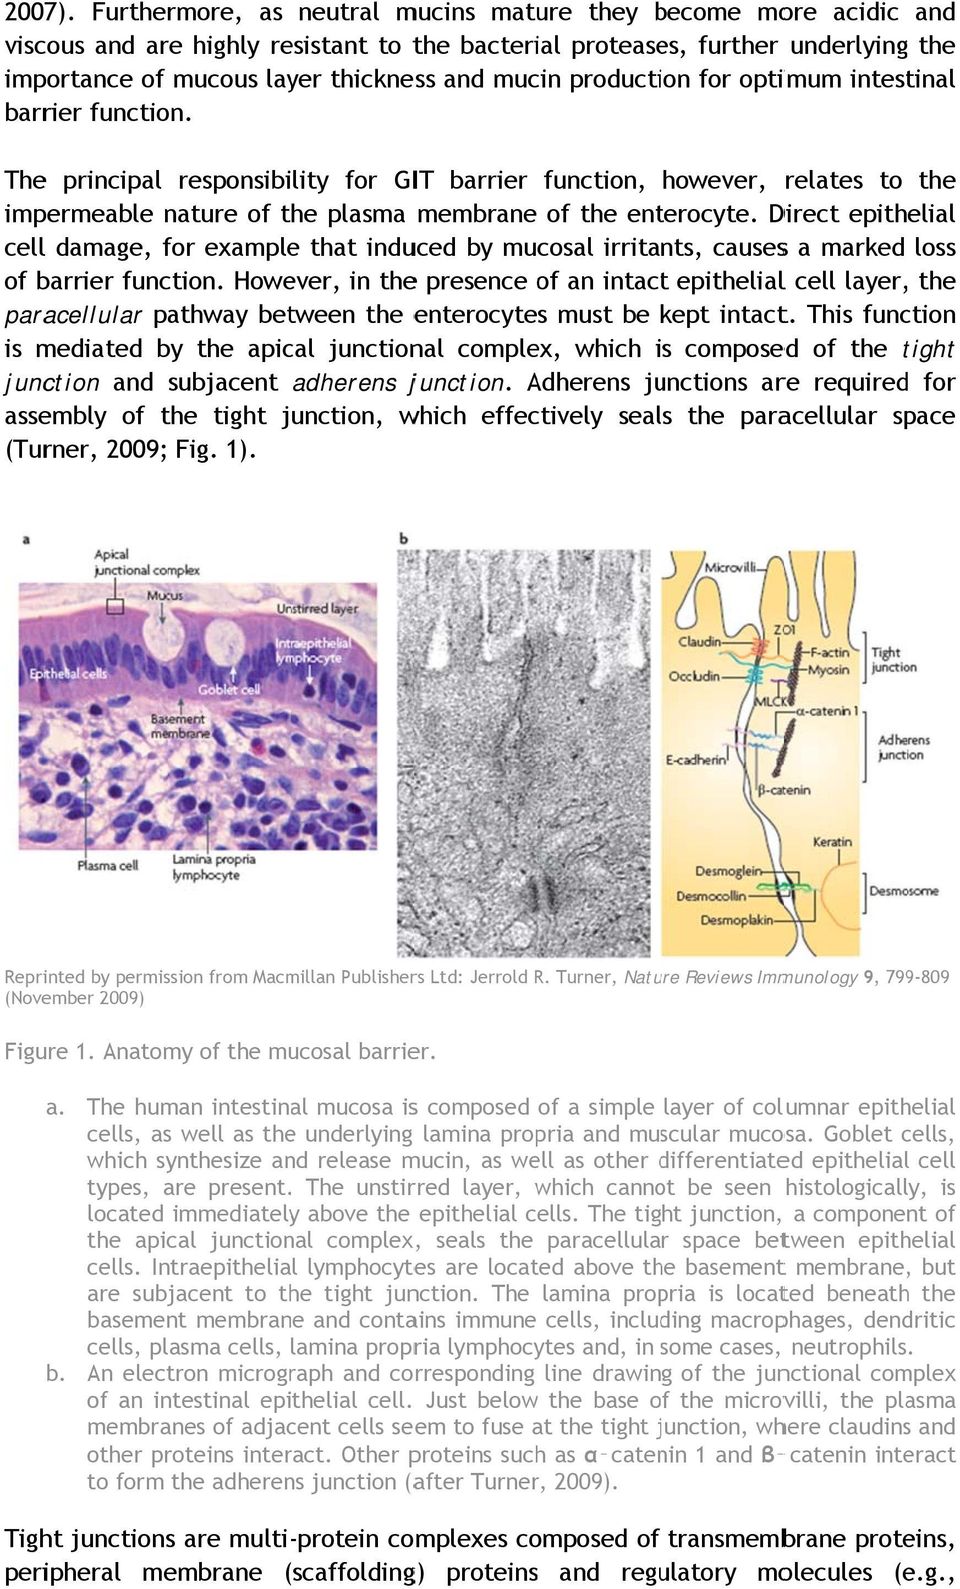 production for optimum intestinal barrier function. The principal responsibility for GIT barrier function, however, relates to the impermeable nature of the plasma membrane of the enterocyte.